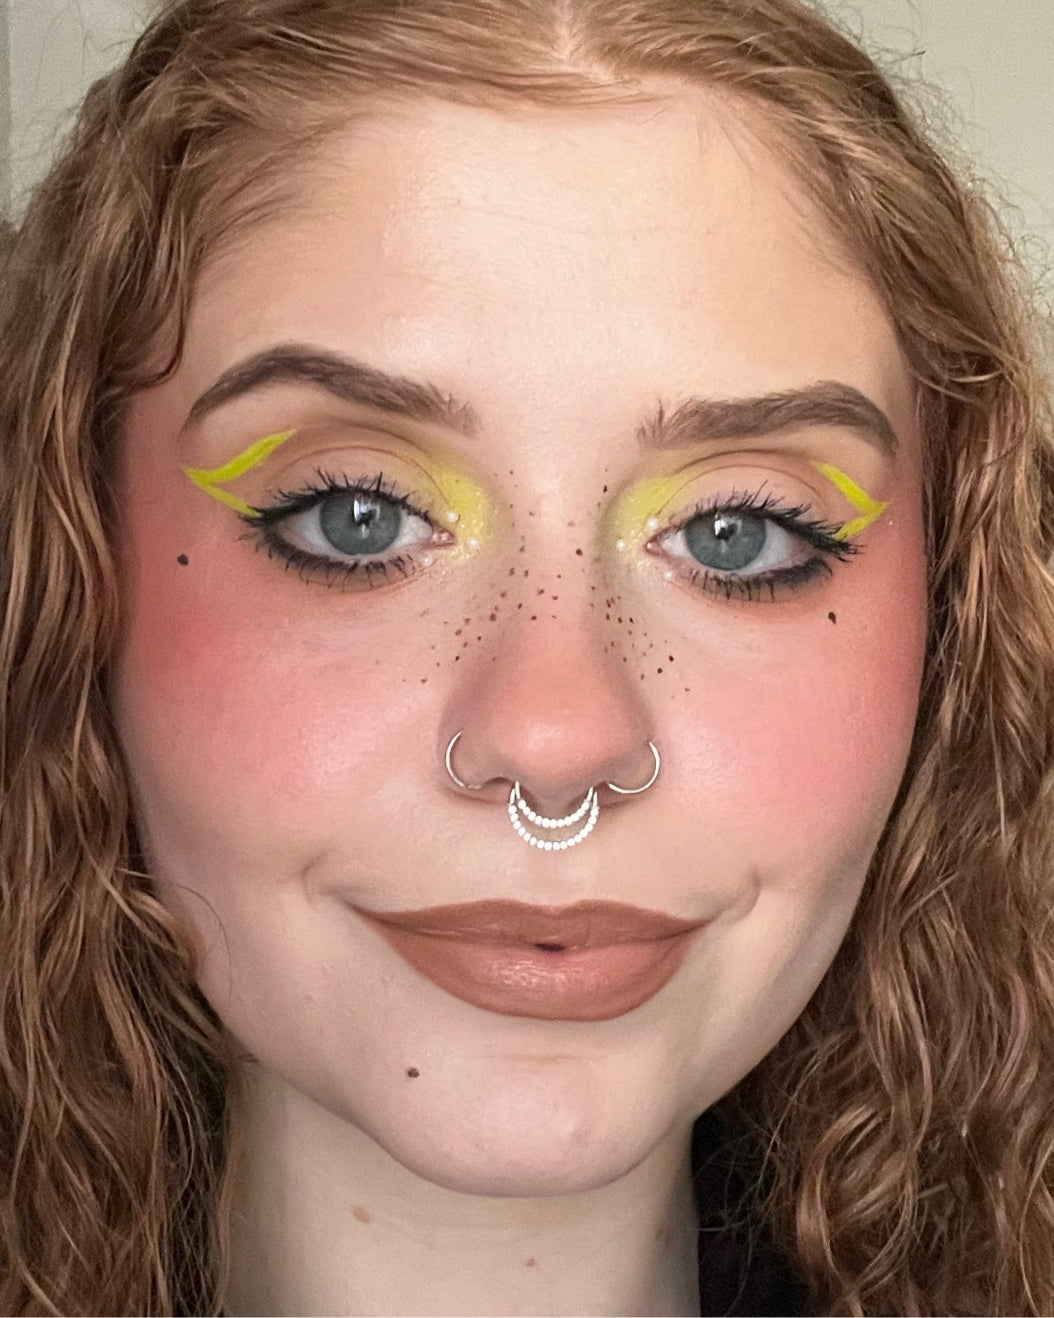 10 Experimental Makeup Looks For Your Next Party - Society19 UK